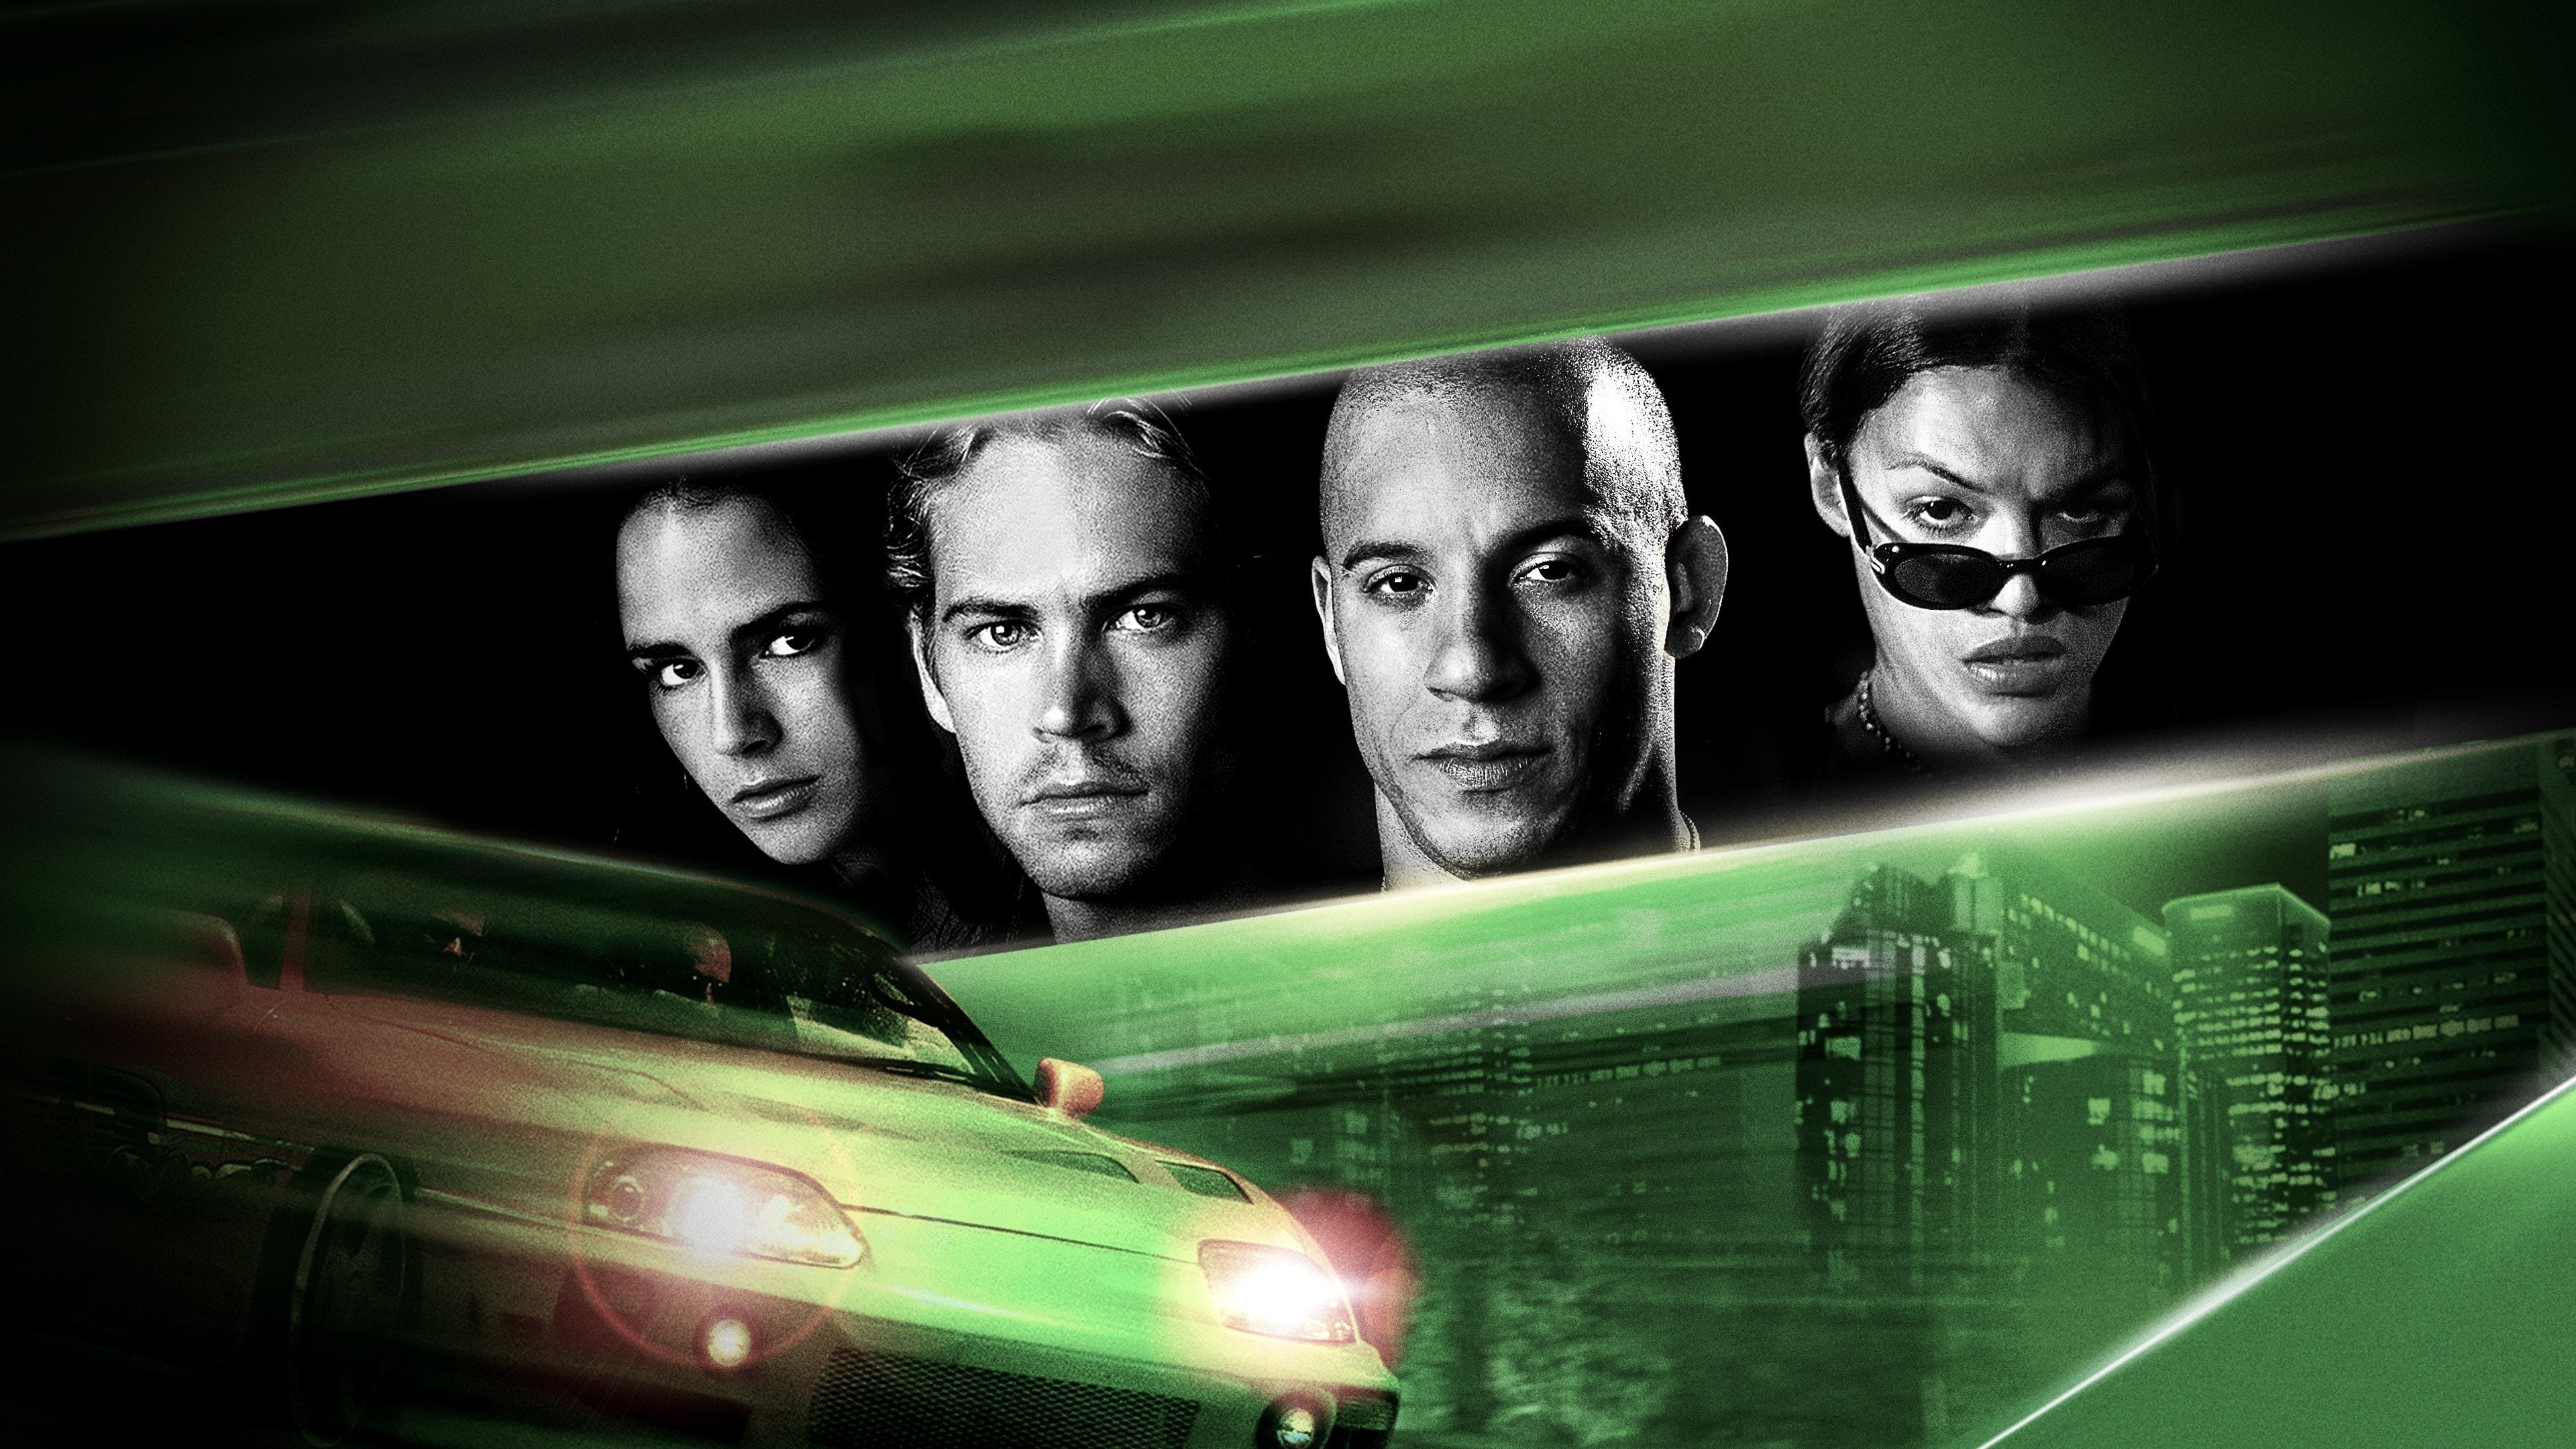 Image du film Fast & Furious yqsee27dtvdcqzkq9sqggm2nfycjpg